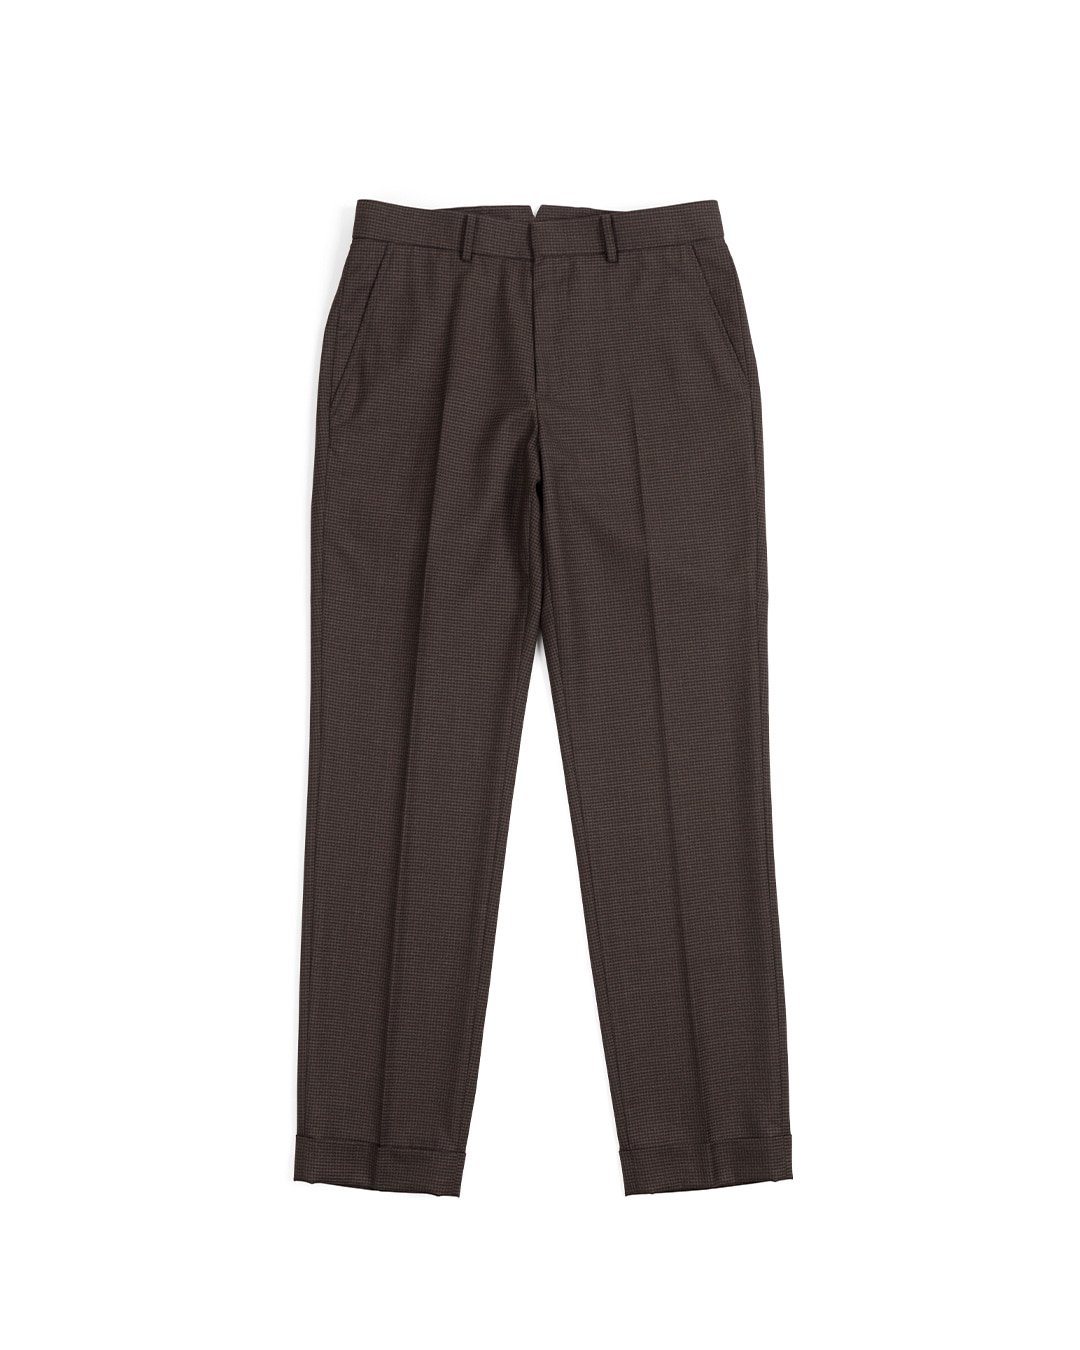 01 SLIM STRAIGHT FIT TROUSERS (brown)